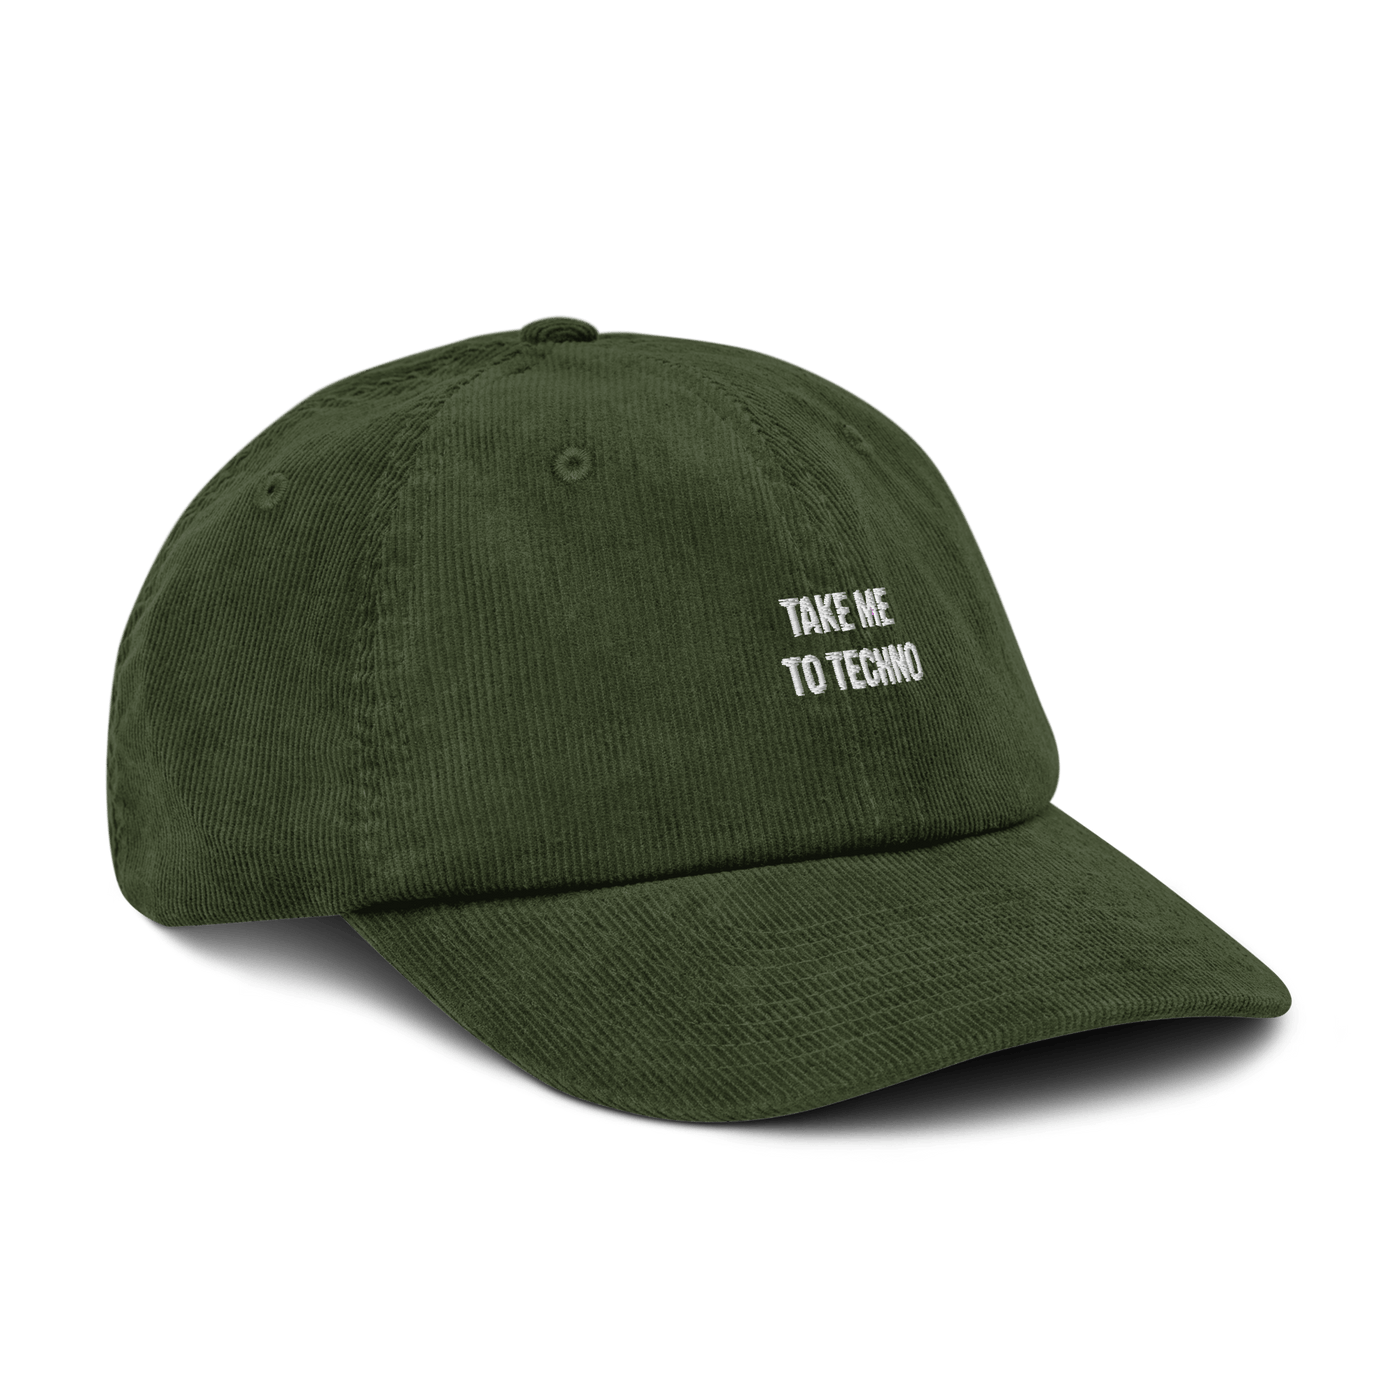 Take me to techno Corduroy hat - Dark Olive - - Just Another Cap Store